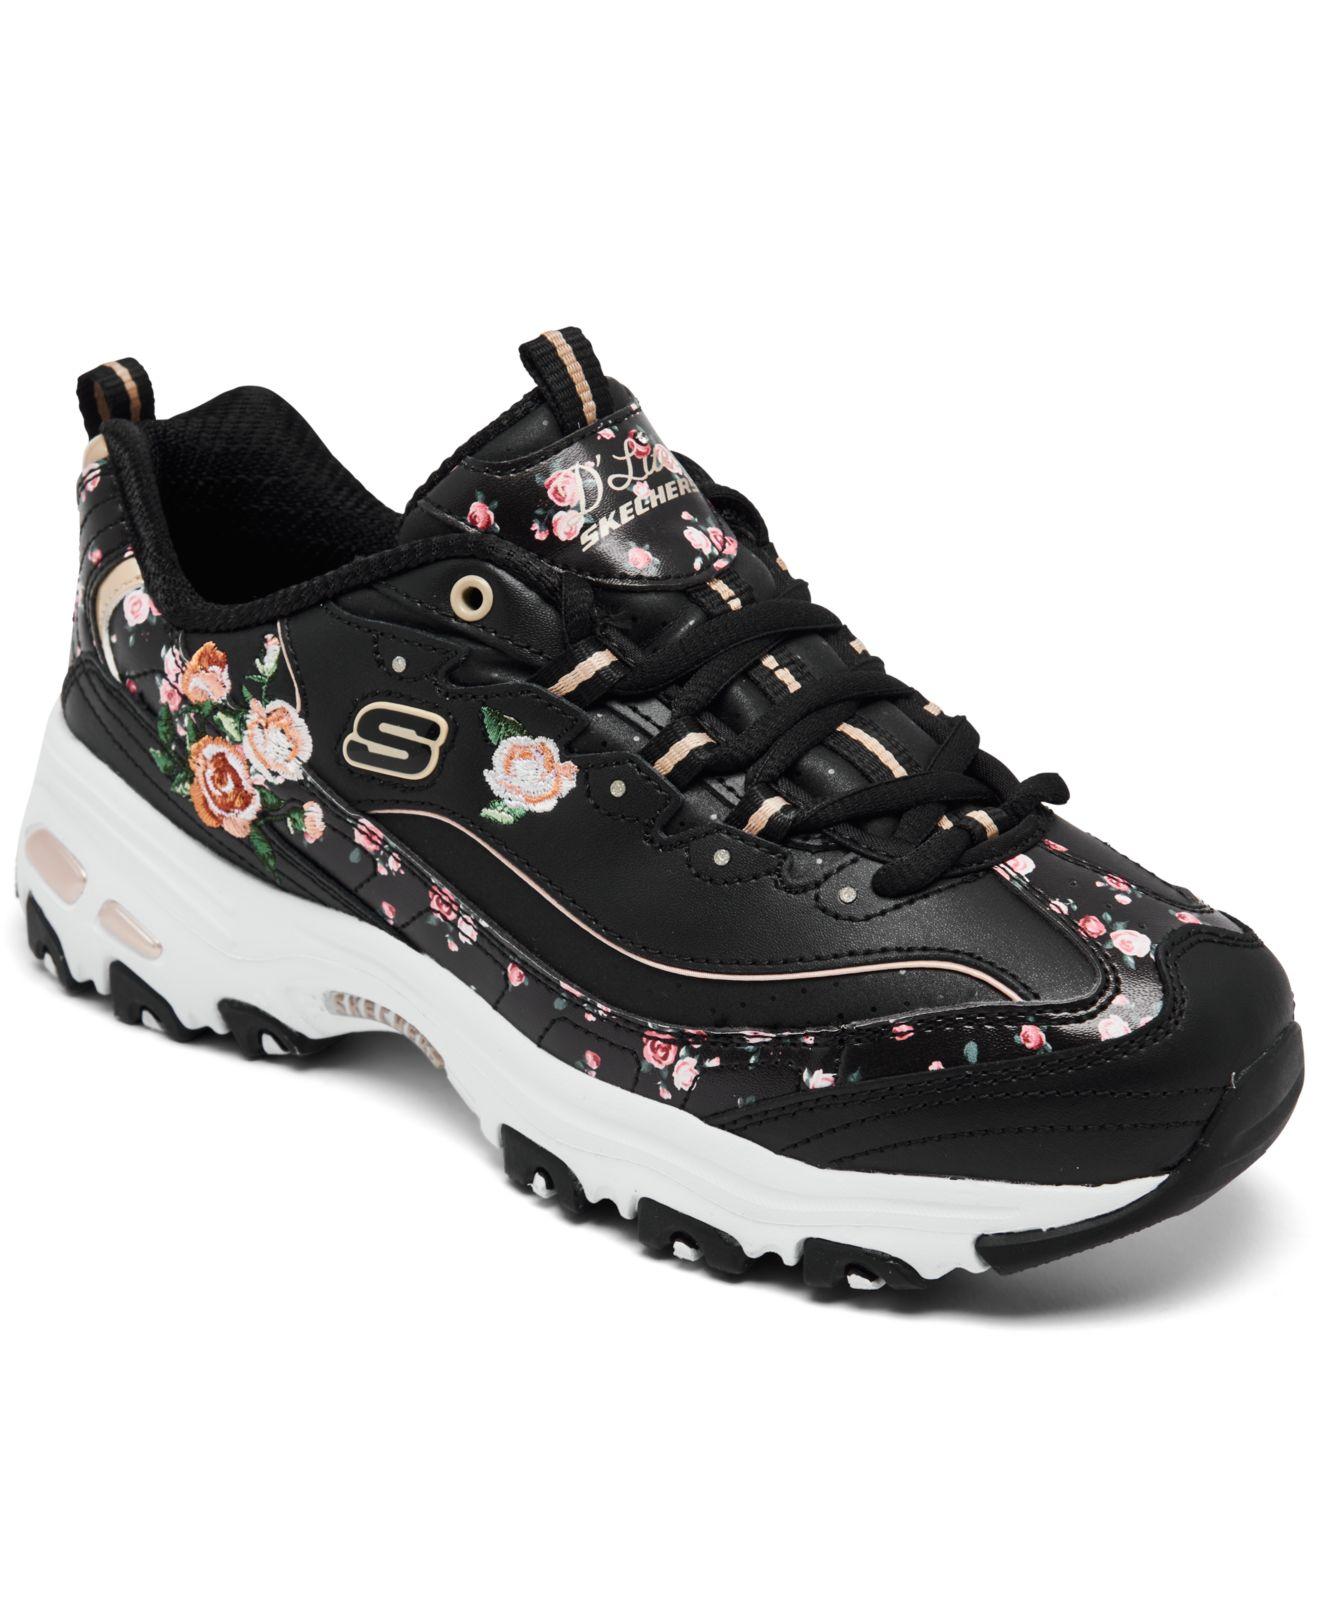 Skechers D'lites - Blooming Path Walking Sneakers From Finish Line